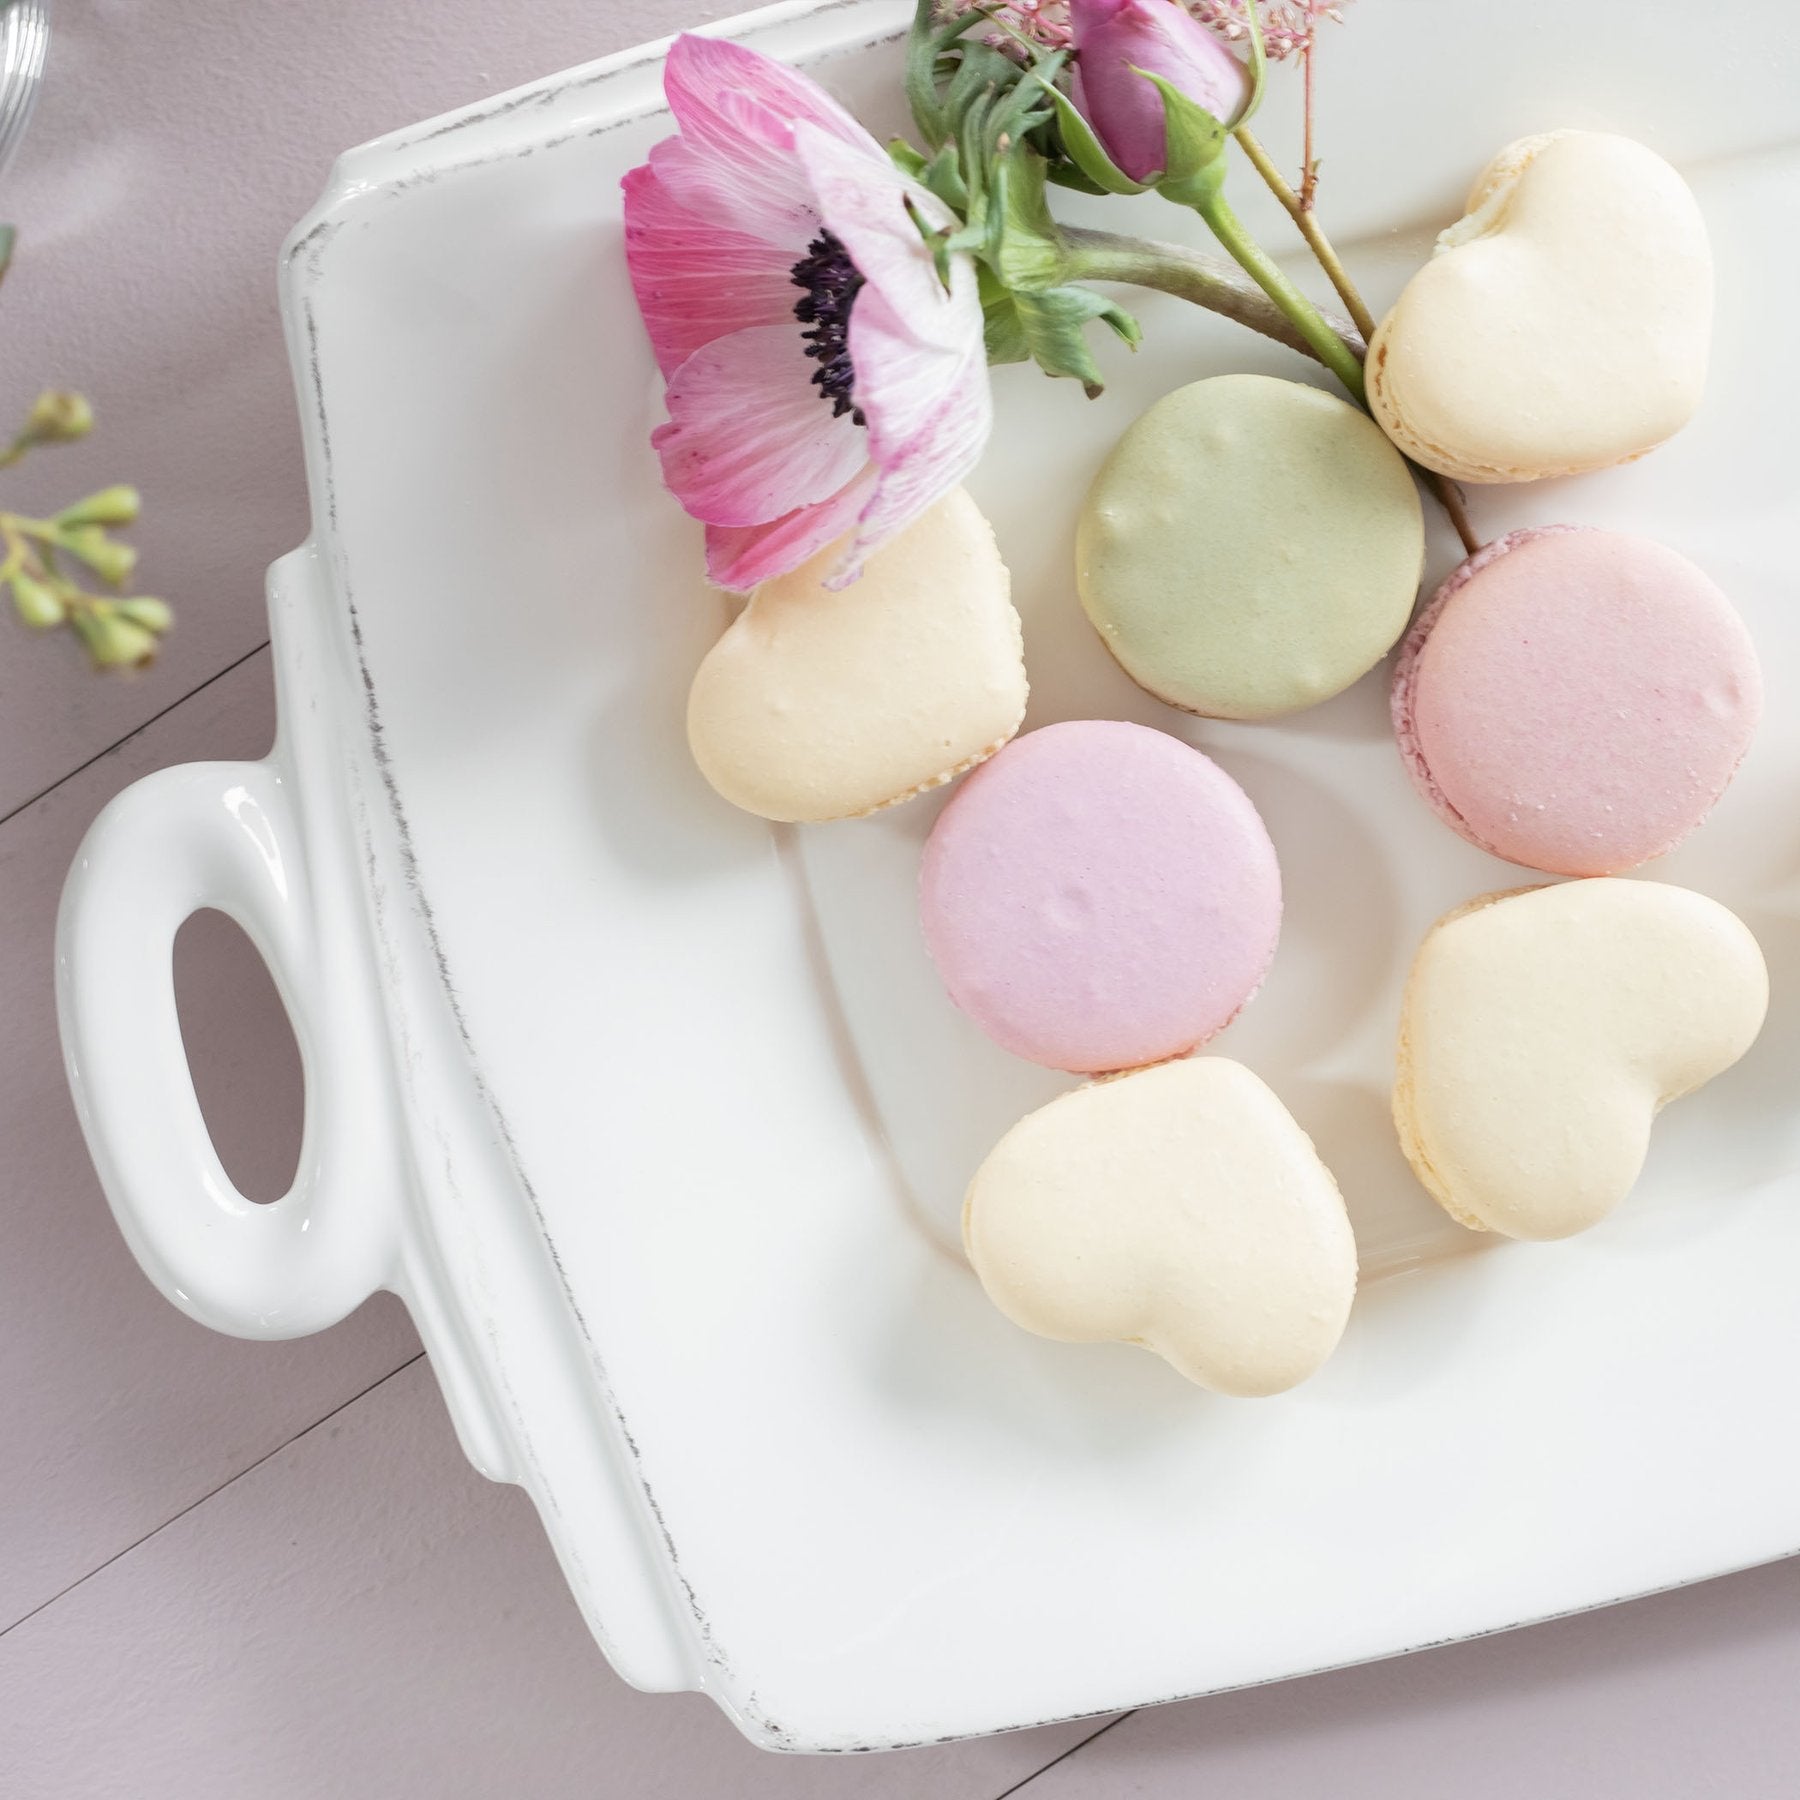 platter filled with cookies and flowers on wooden tabletop.